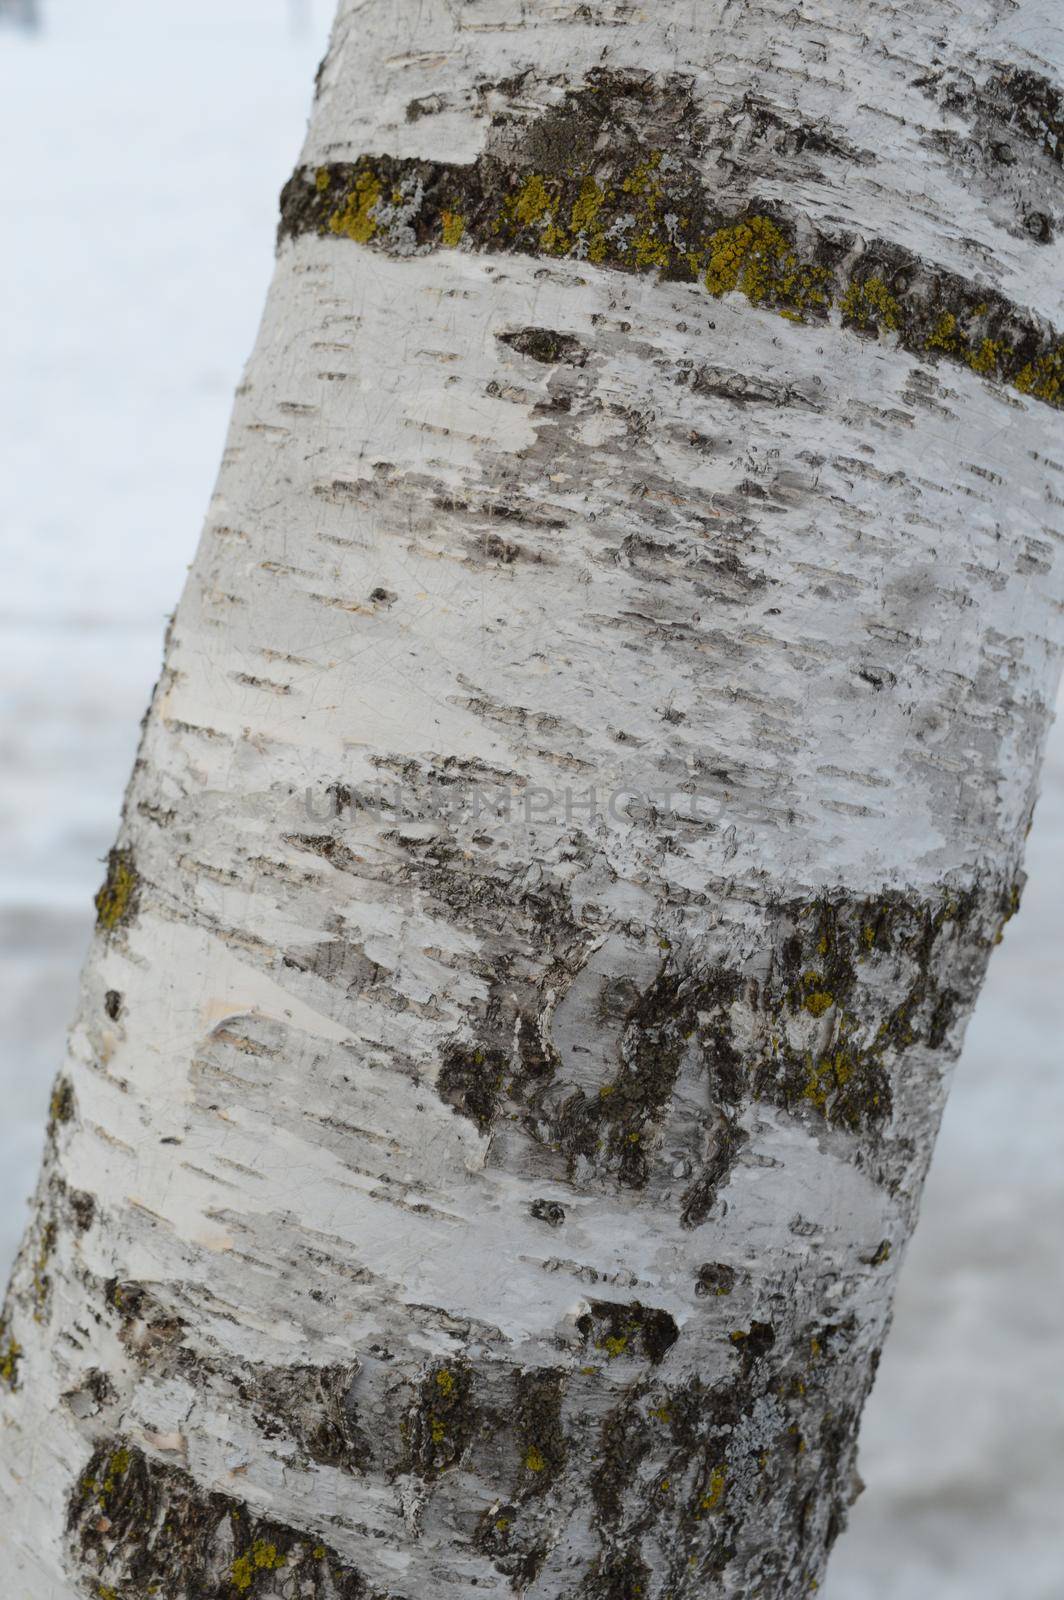 A closeup of a white birch tree and its bark details.